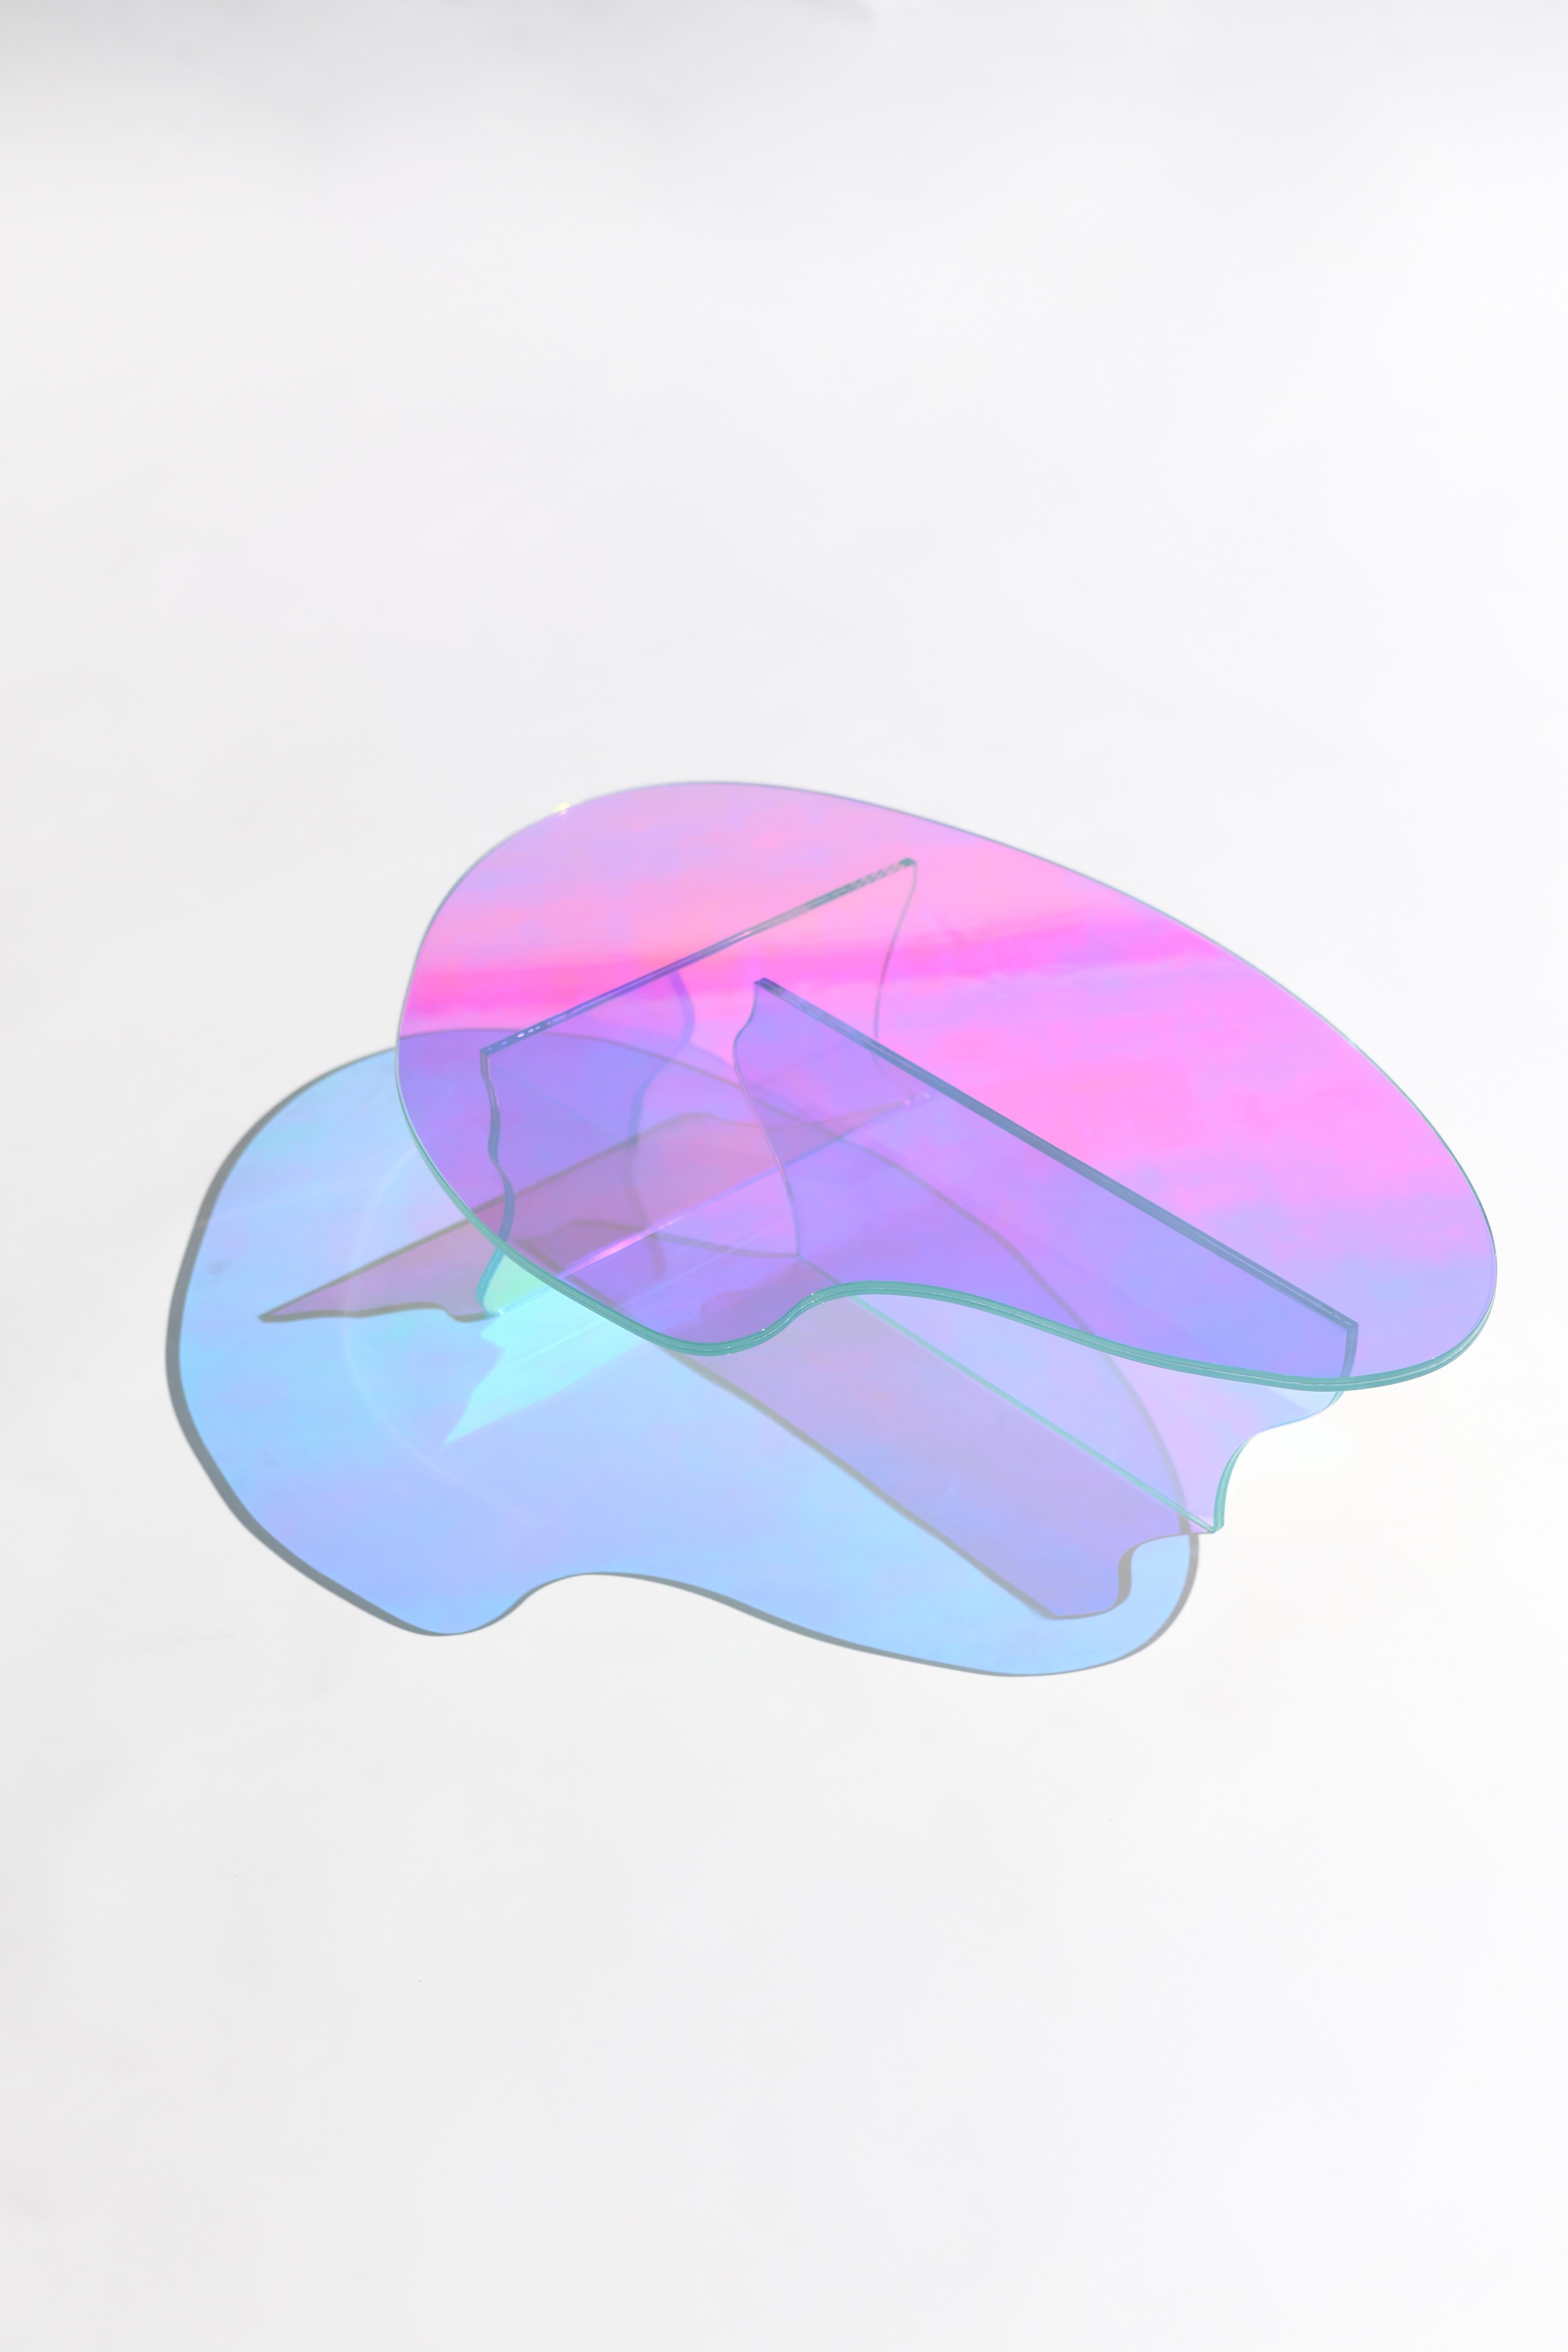 Kinetic colors glass table by Brajak Vitberg
Materials: Glass, dichroic film
Dimensions: 86 x 58 x 20 cm

Bijelic and Brajak are two architects from Ljubljana, Slovenia.
They are striving to design craft elements and make them timeless through